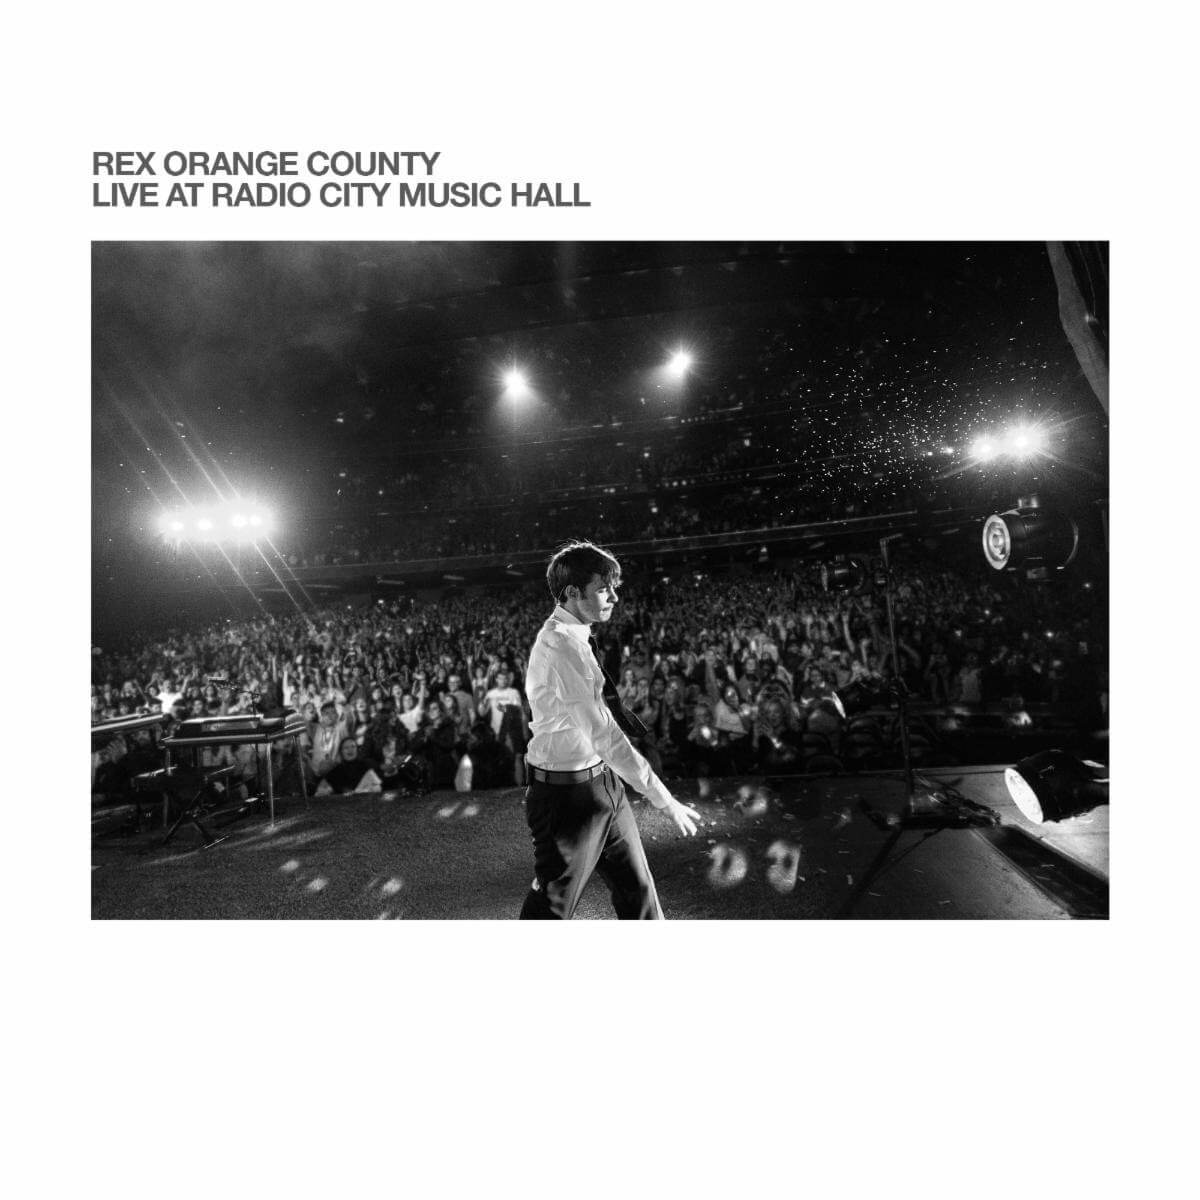 Rex Orange County has released a new live EP and documentary